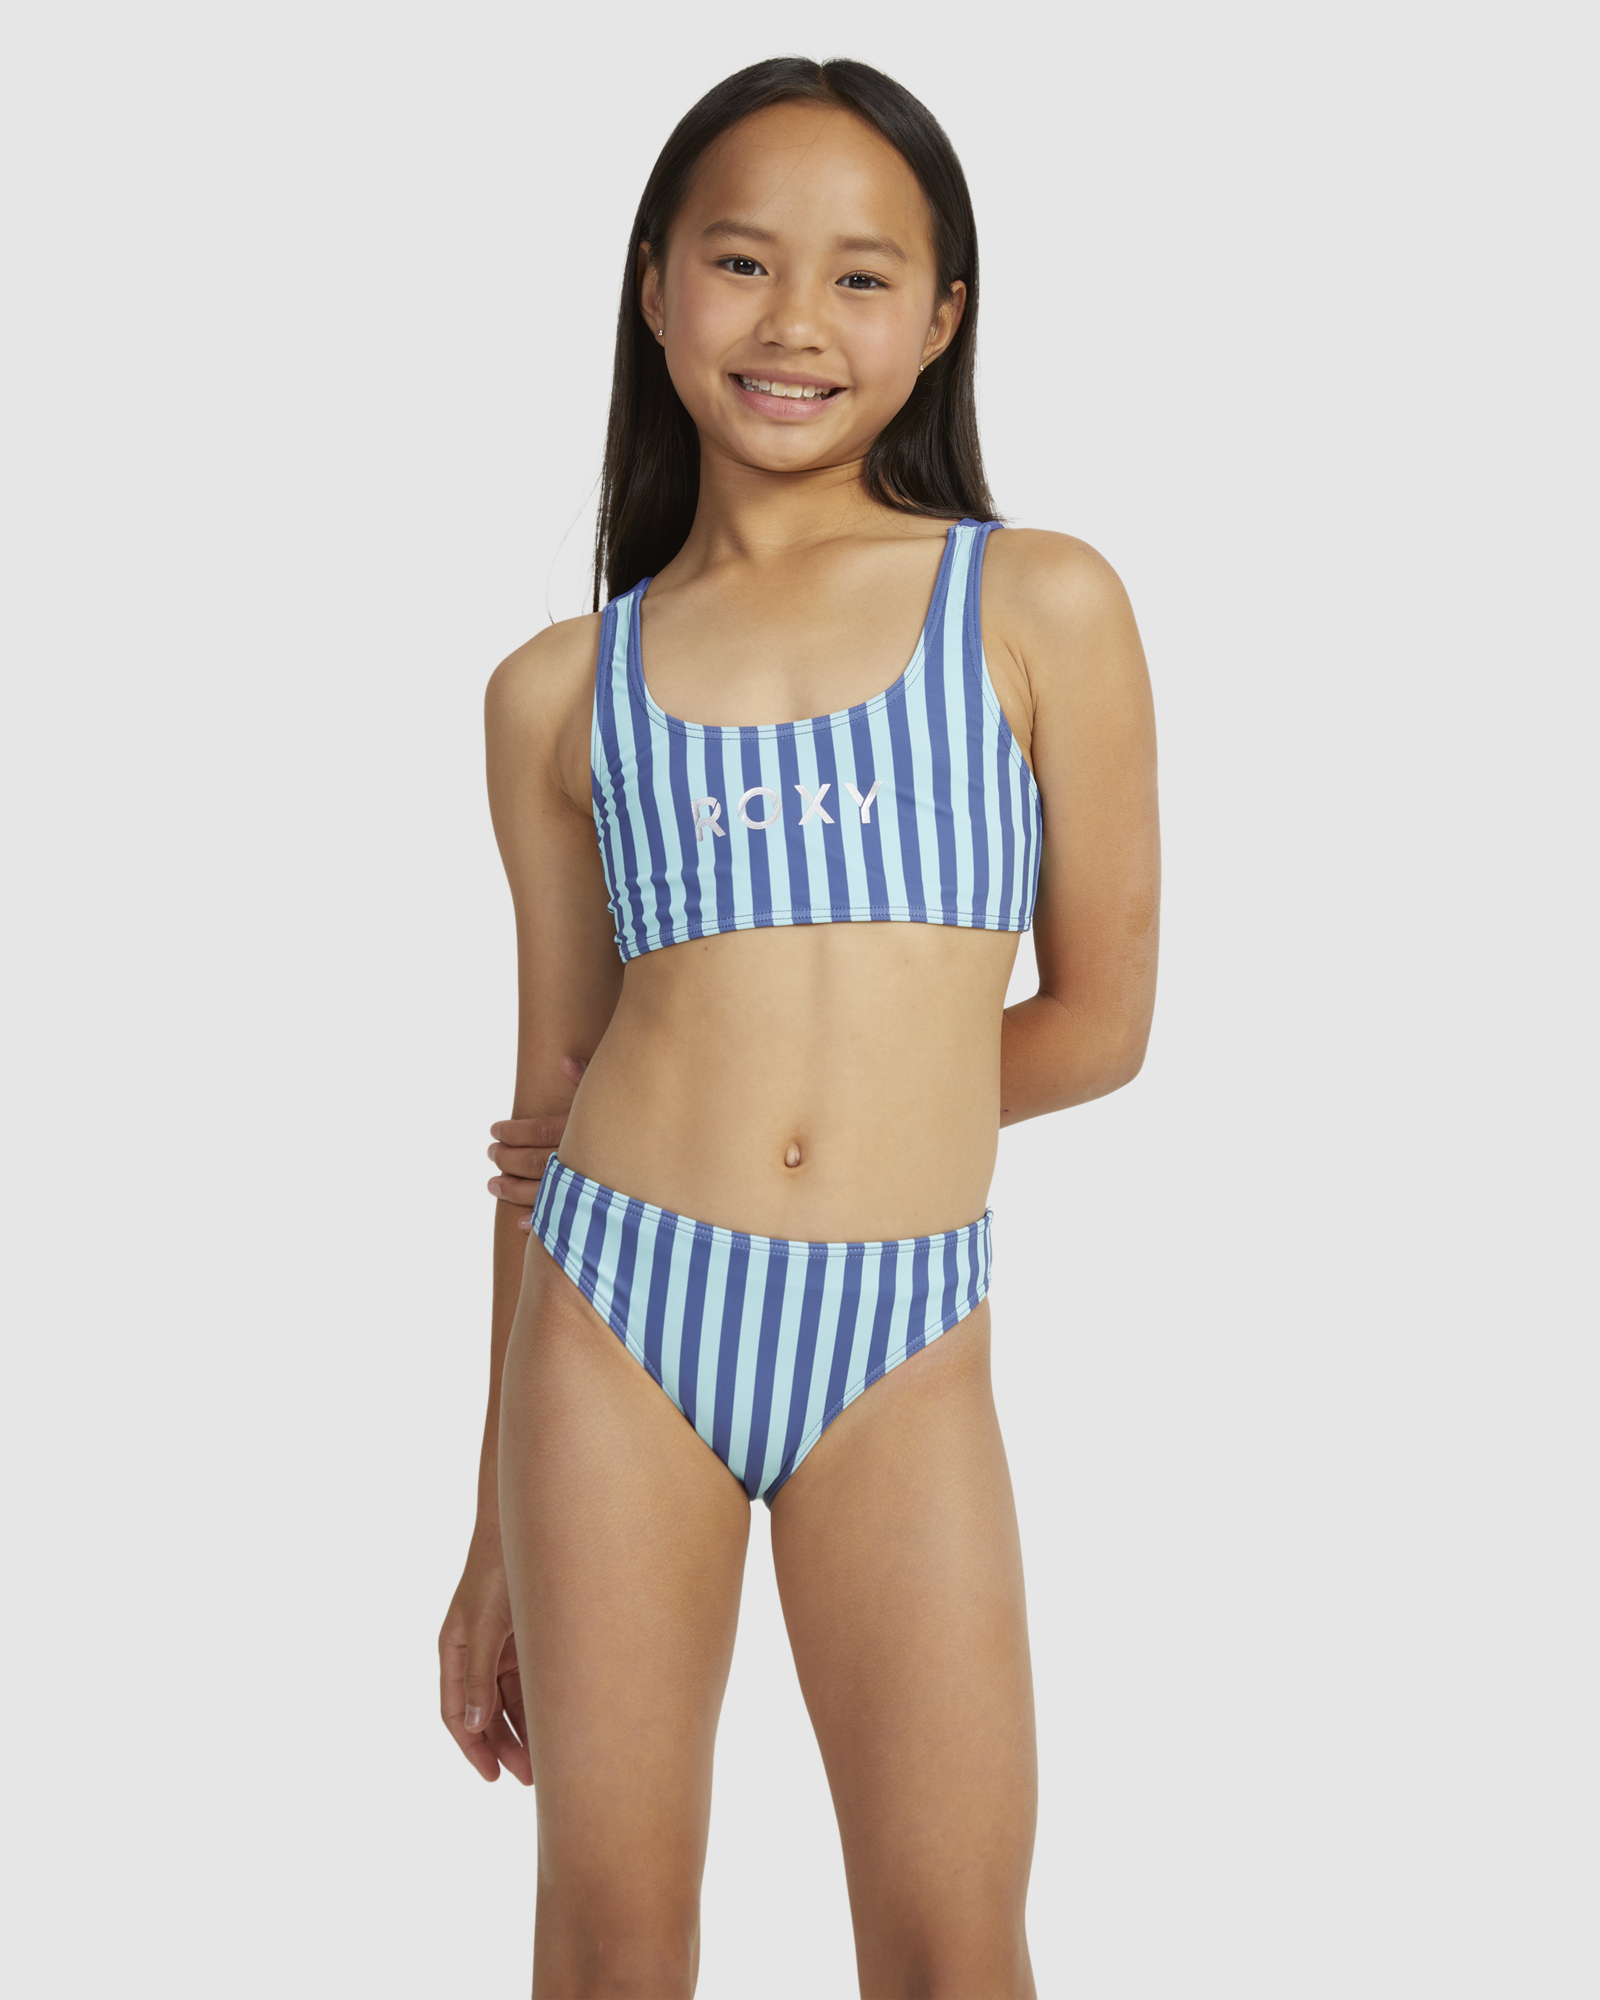 LBECLEY Swimsuits for Girls 12-14 Holiday Swimsuit Set Suit Piece Gradient  Girls Bikini Two Cute Color Bathing Girls Swimwear Bathing Suits 6X Blue